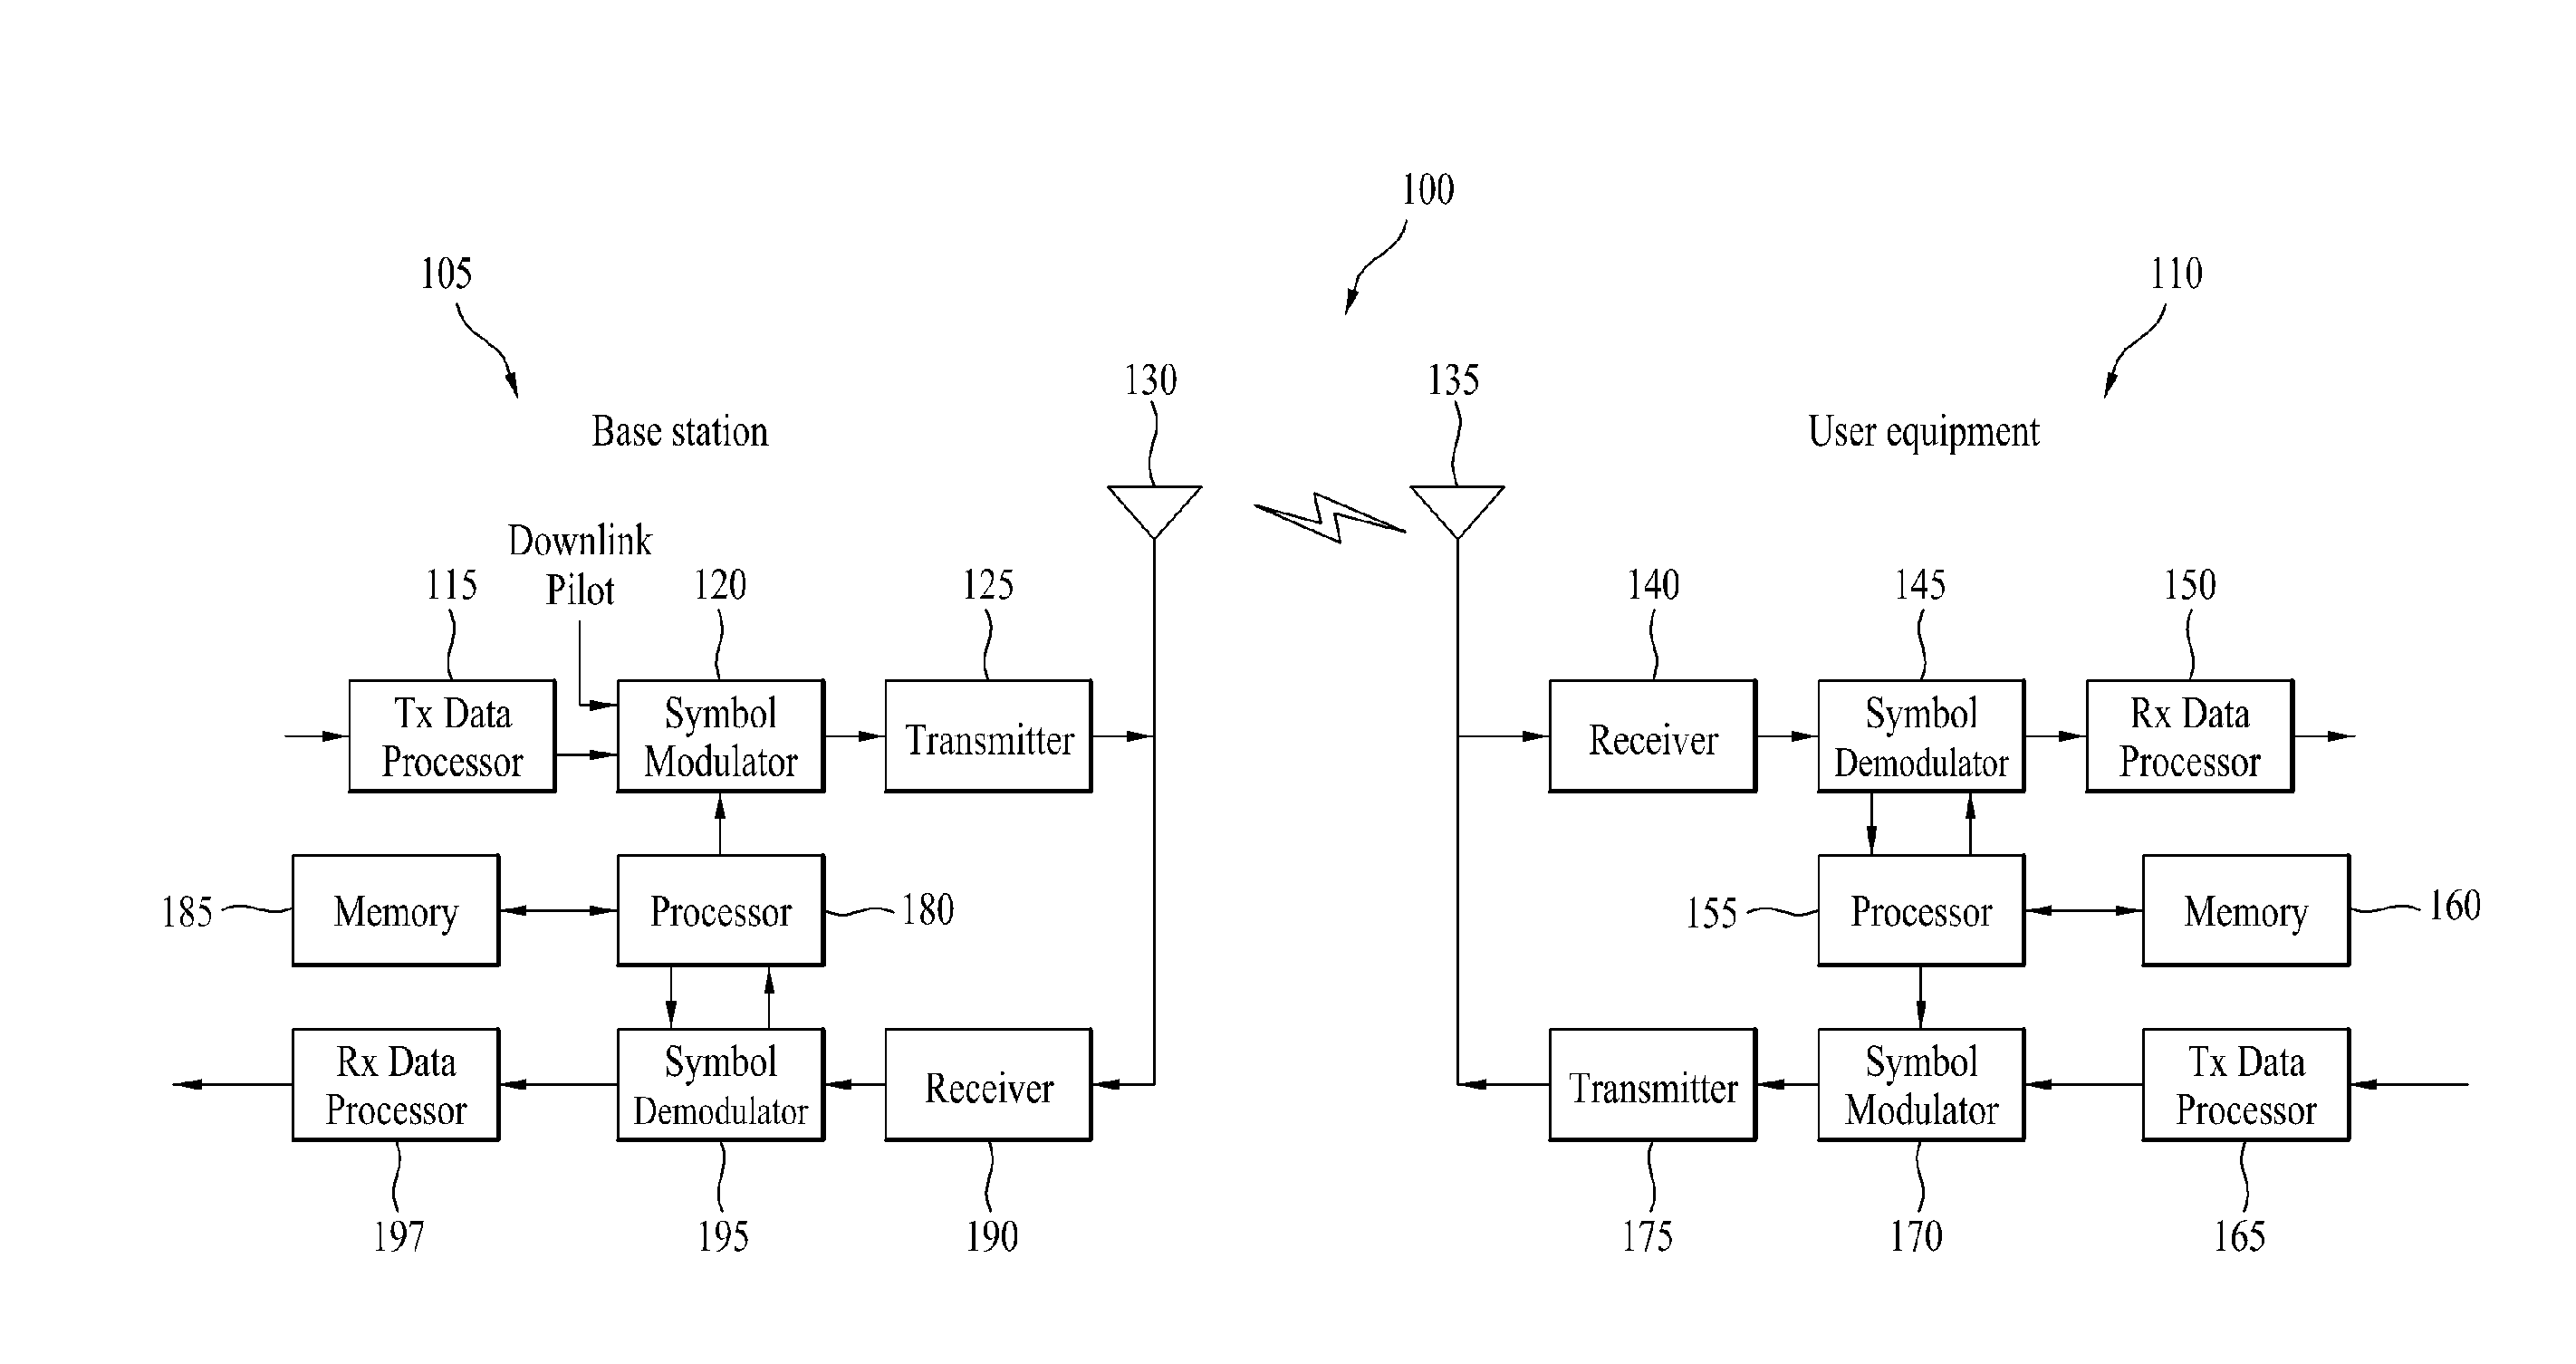 Method for terminal deciding uplink transmission power in macro cell environment comprising remote radio head (RRH), and terminal apparatus for same